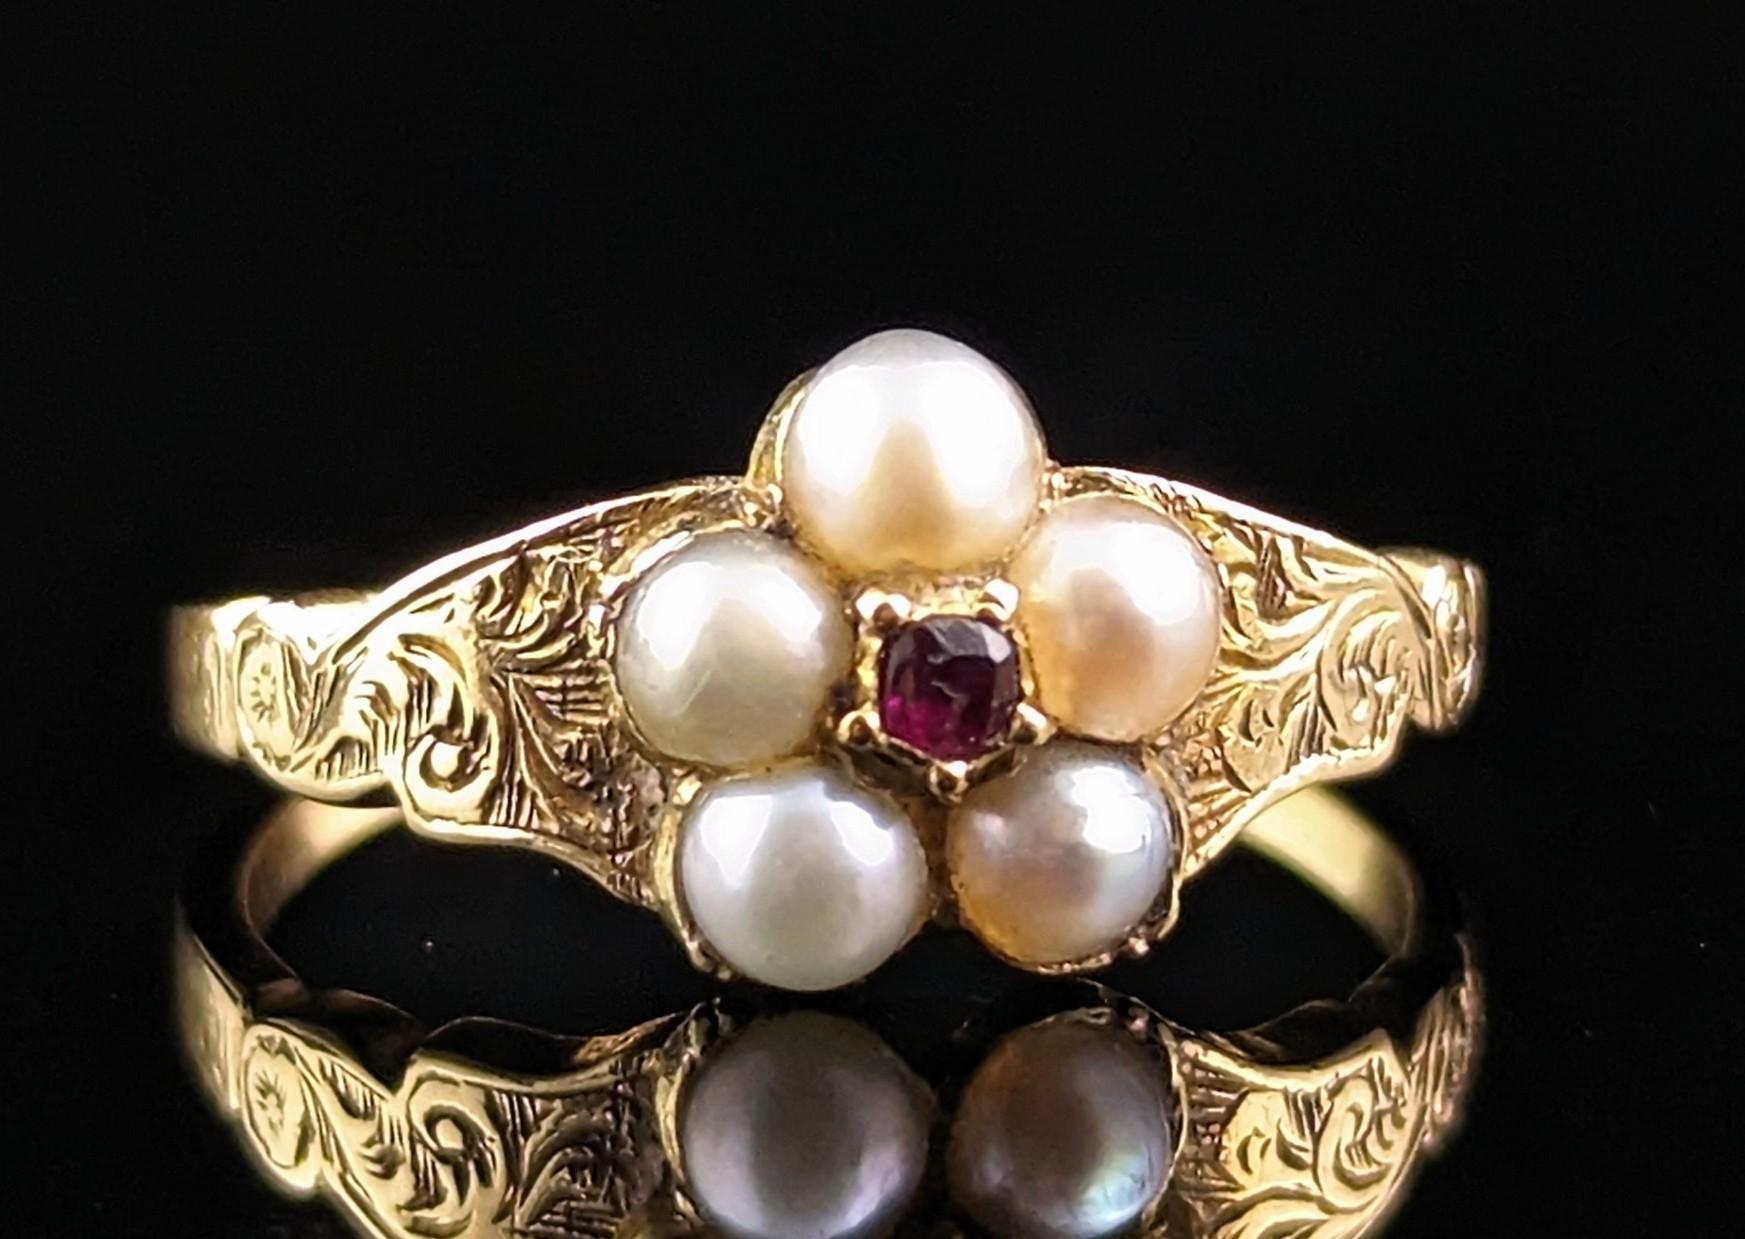 This dainty antique split pearl and Ruby floral cluster ring is delicately charming and oh so sweet.

We love it's soft floral design and lustrous creamy pearls with a single rose cut ruby set to the centre.

The ring is crafted in rich 18ct yellow